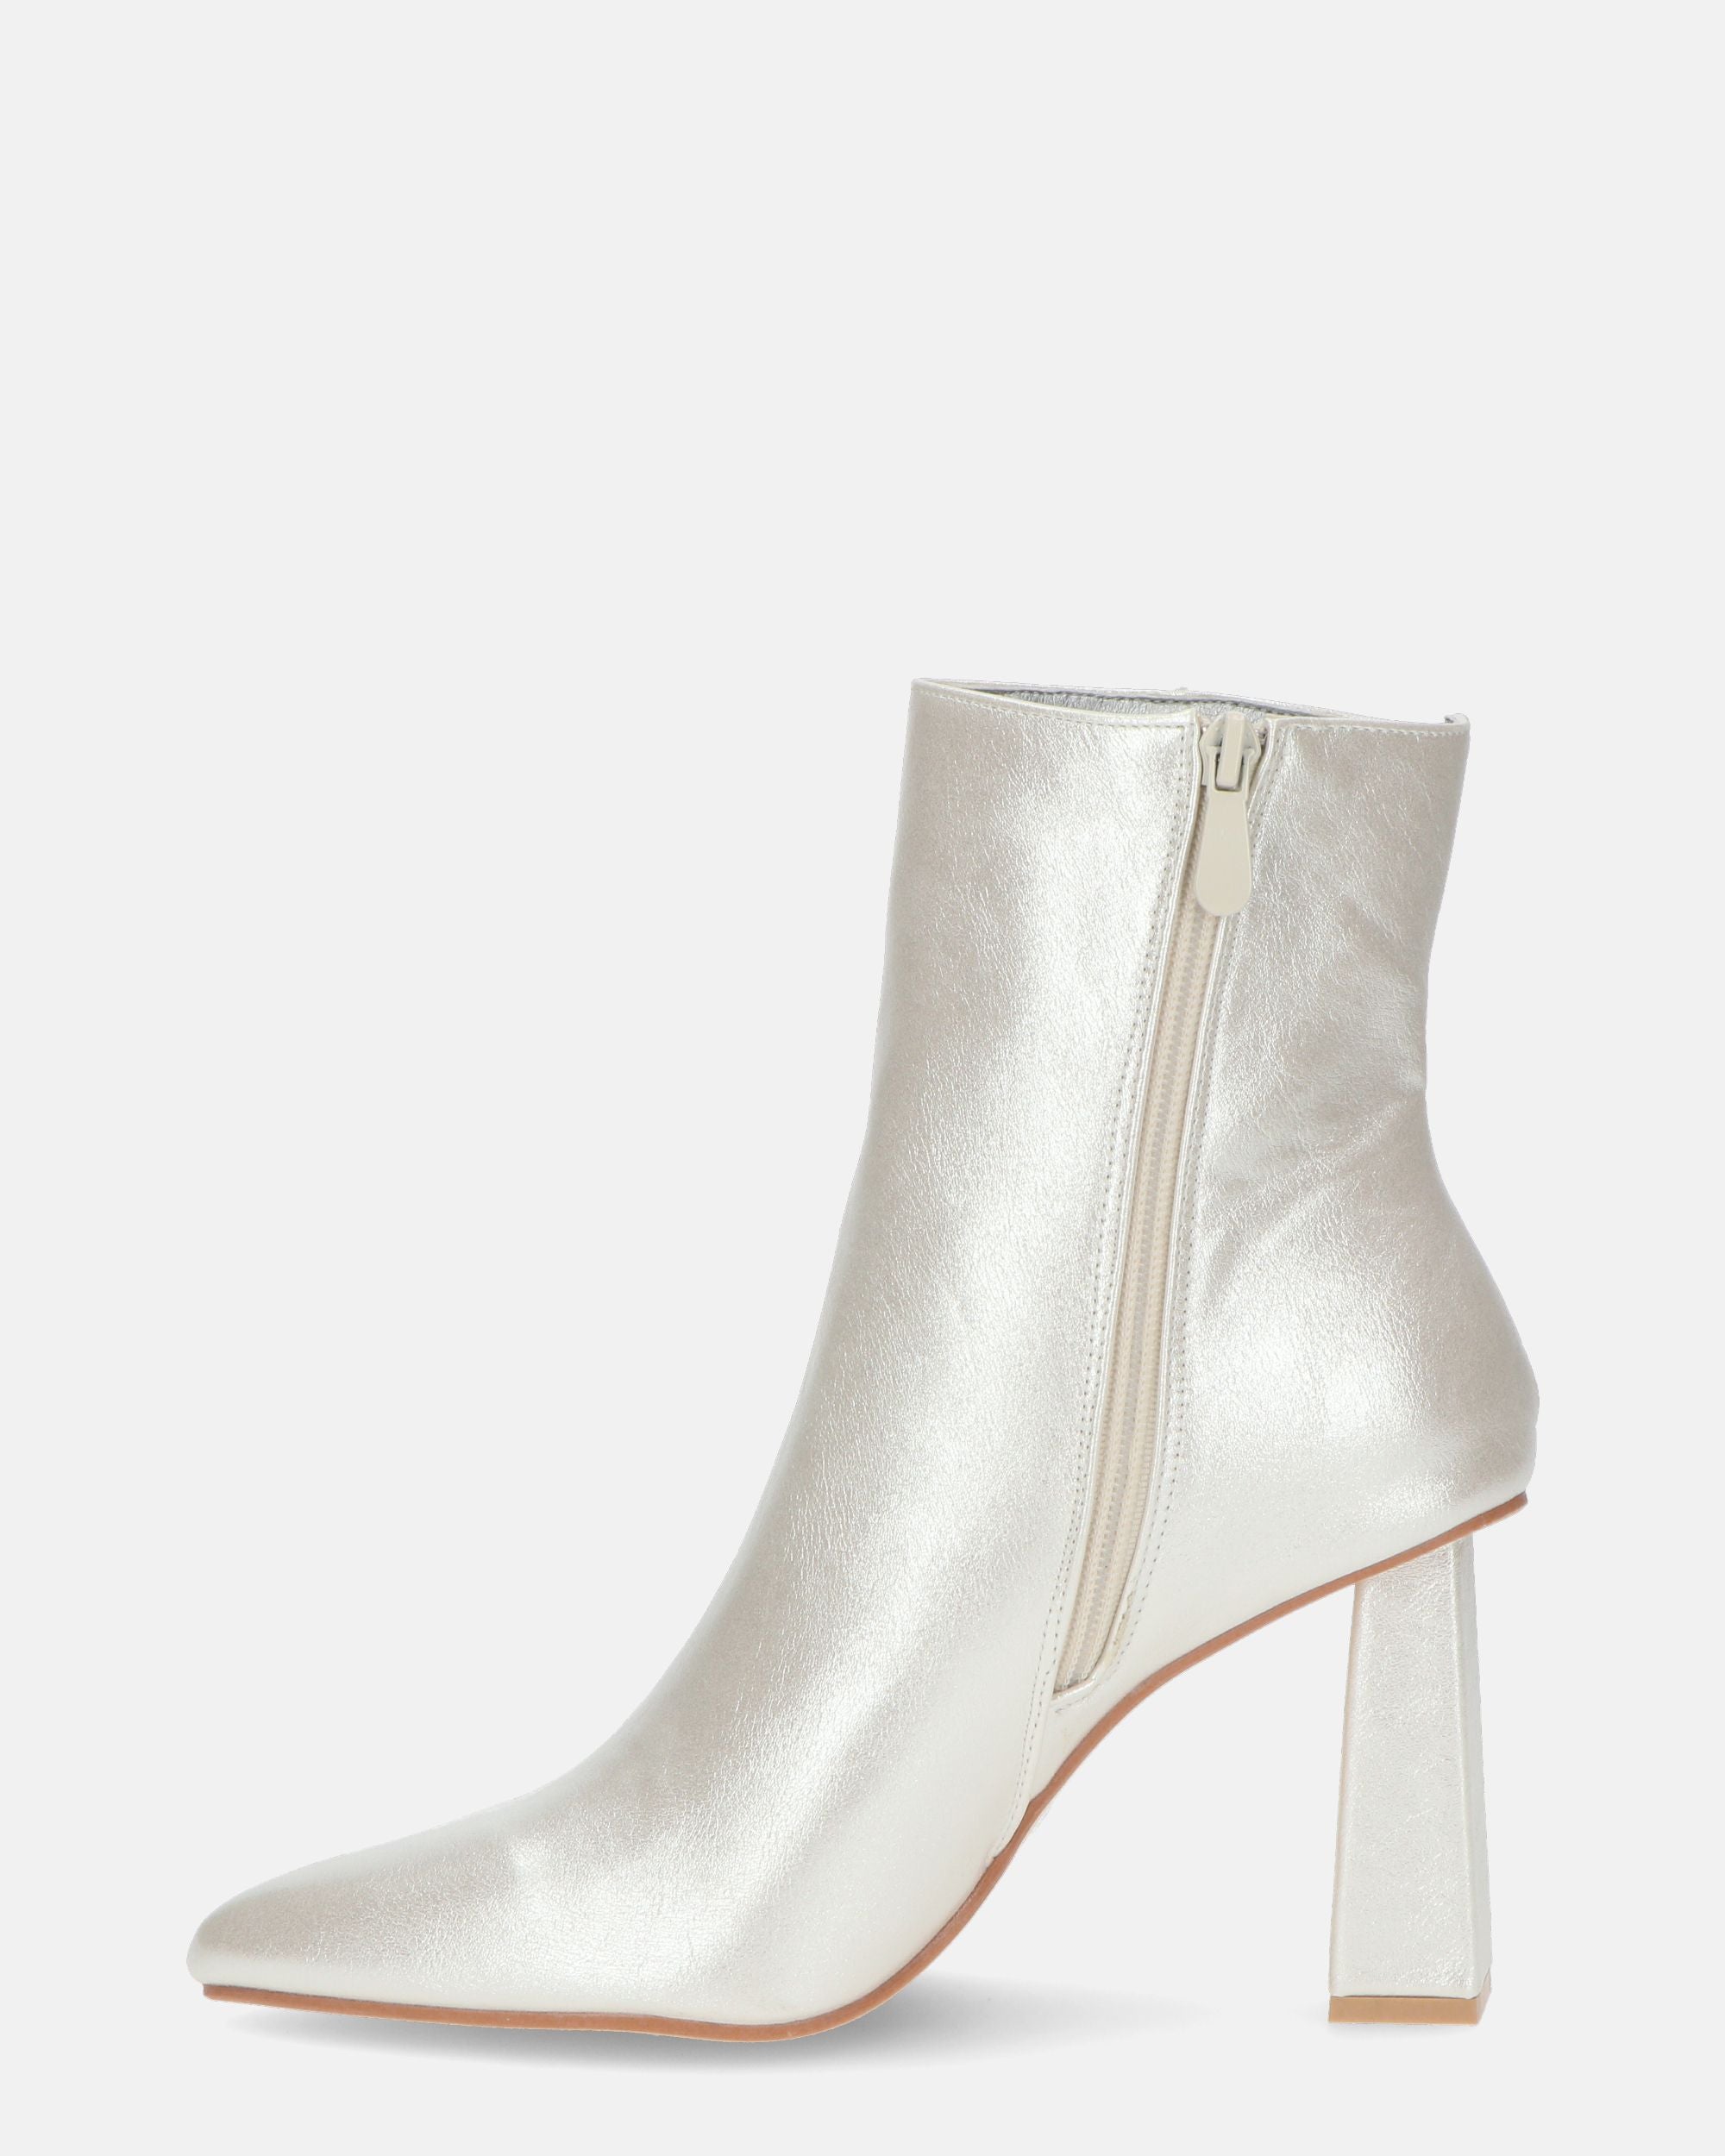 ADELAIDE - silver PU ankle boots with heel